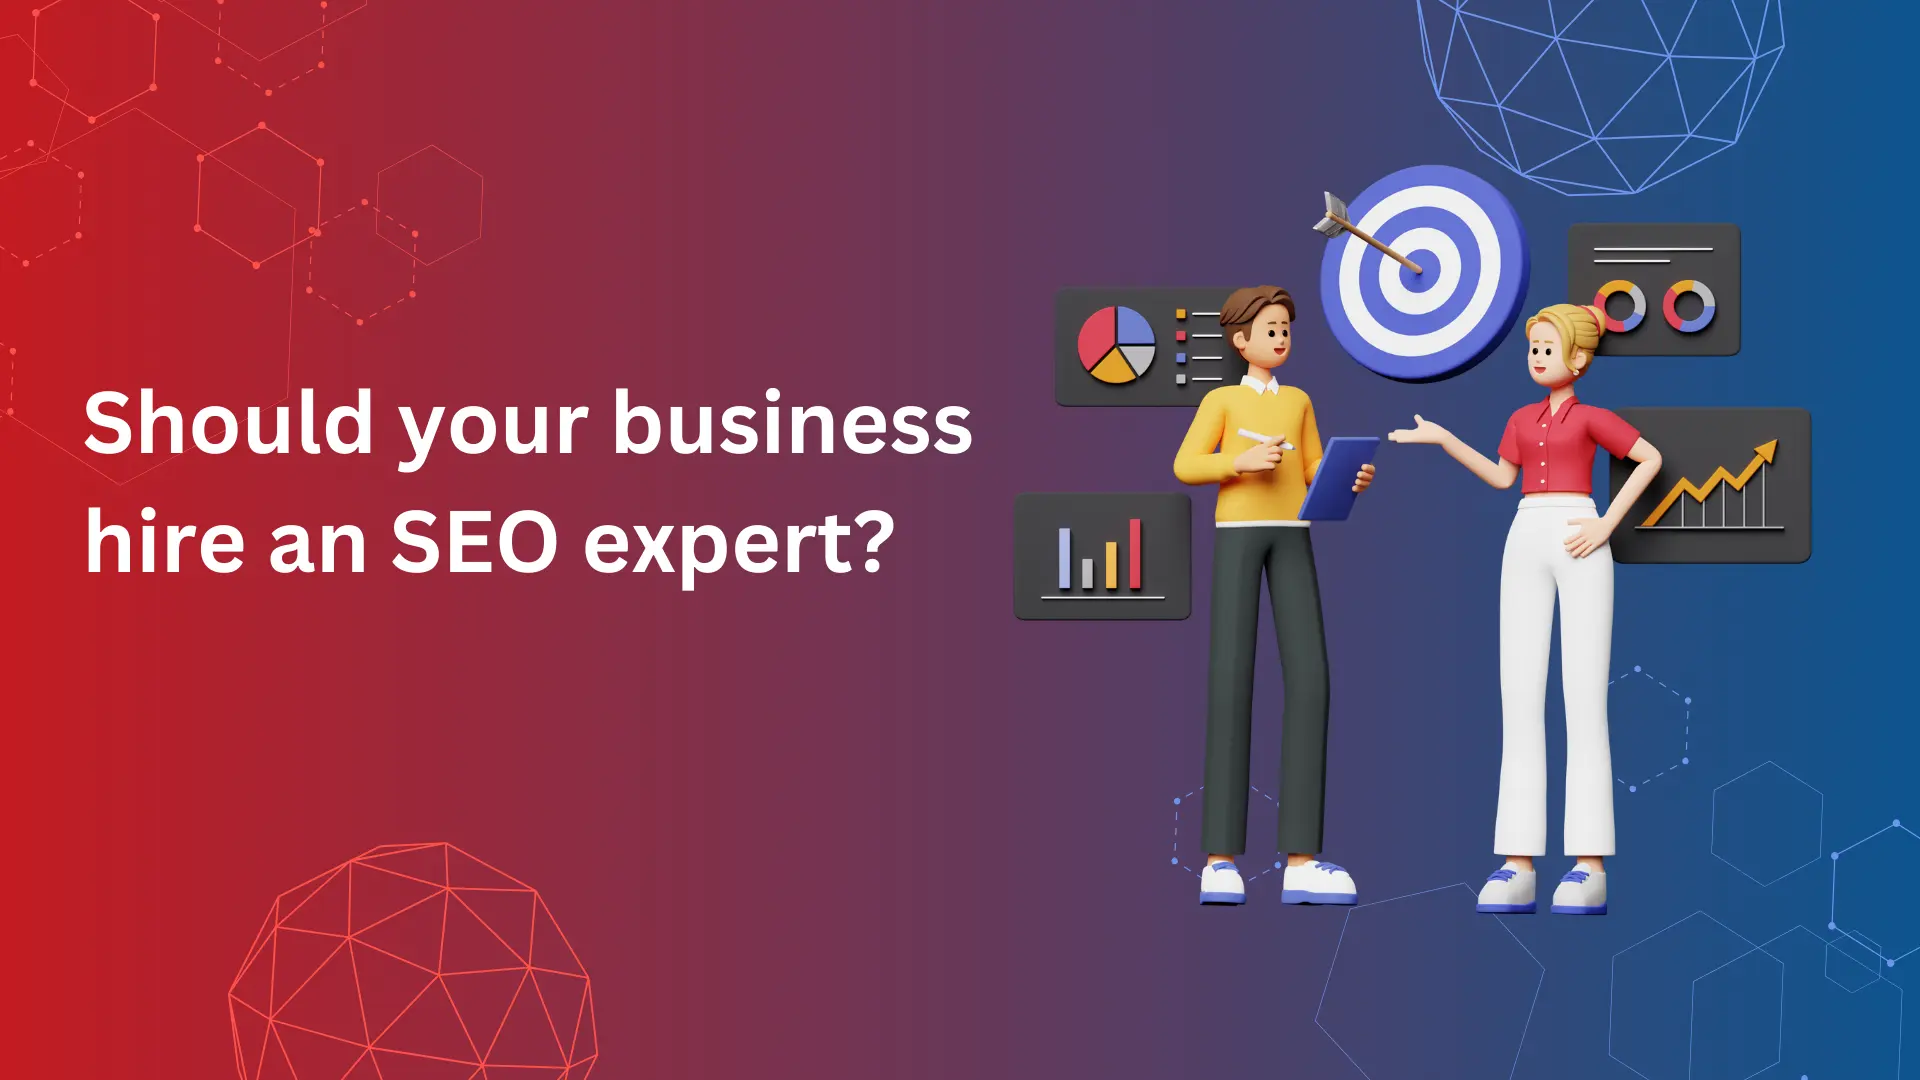 Should your business hire an SEO expert?